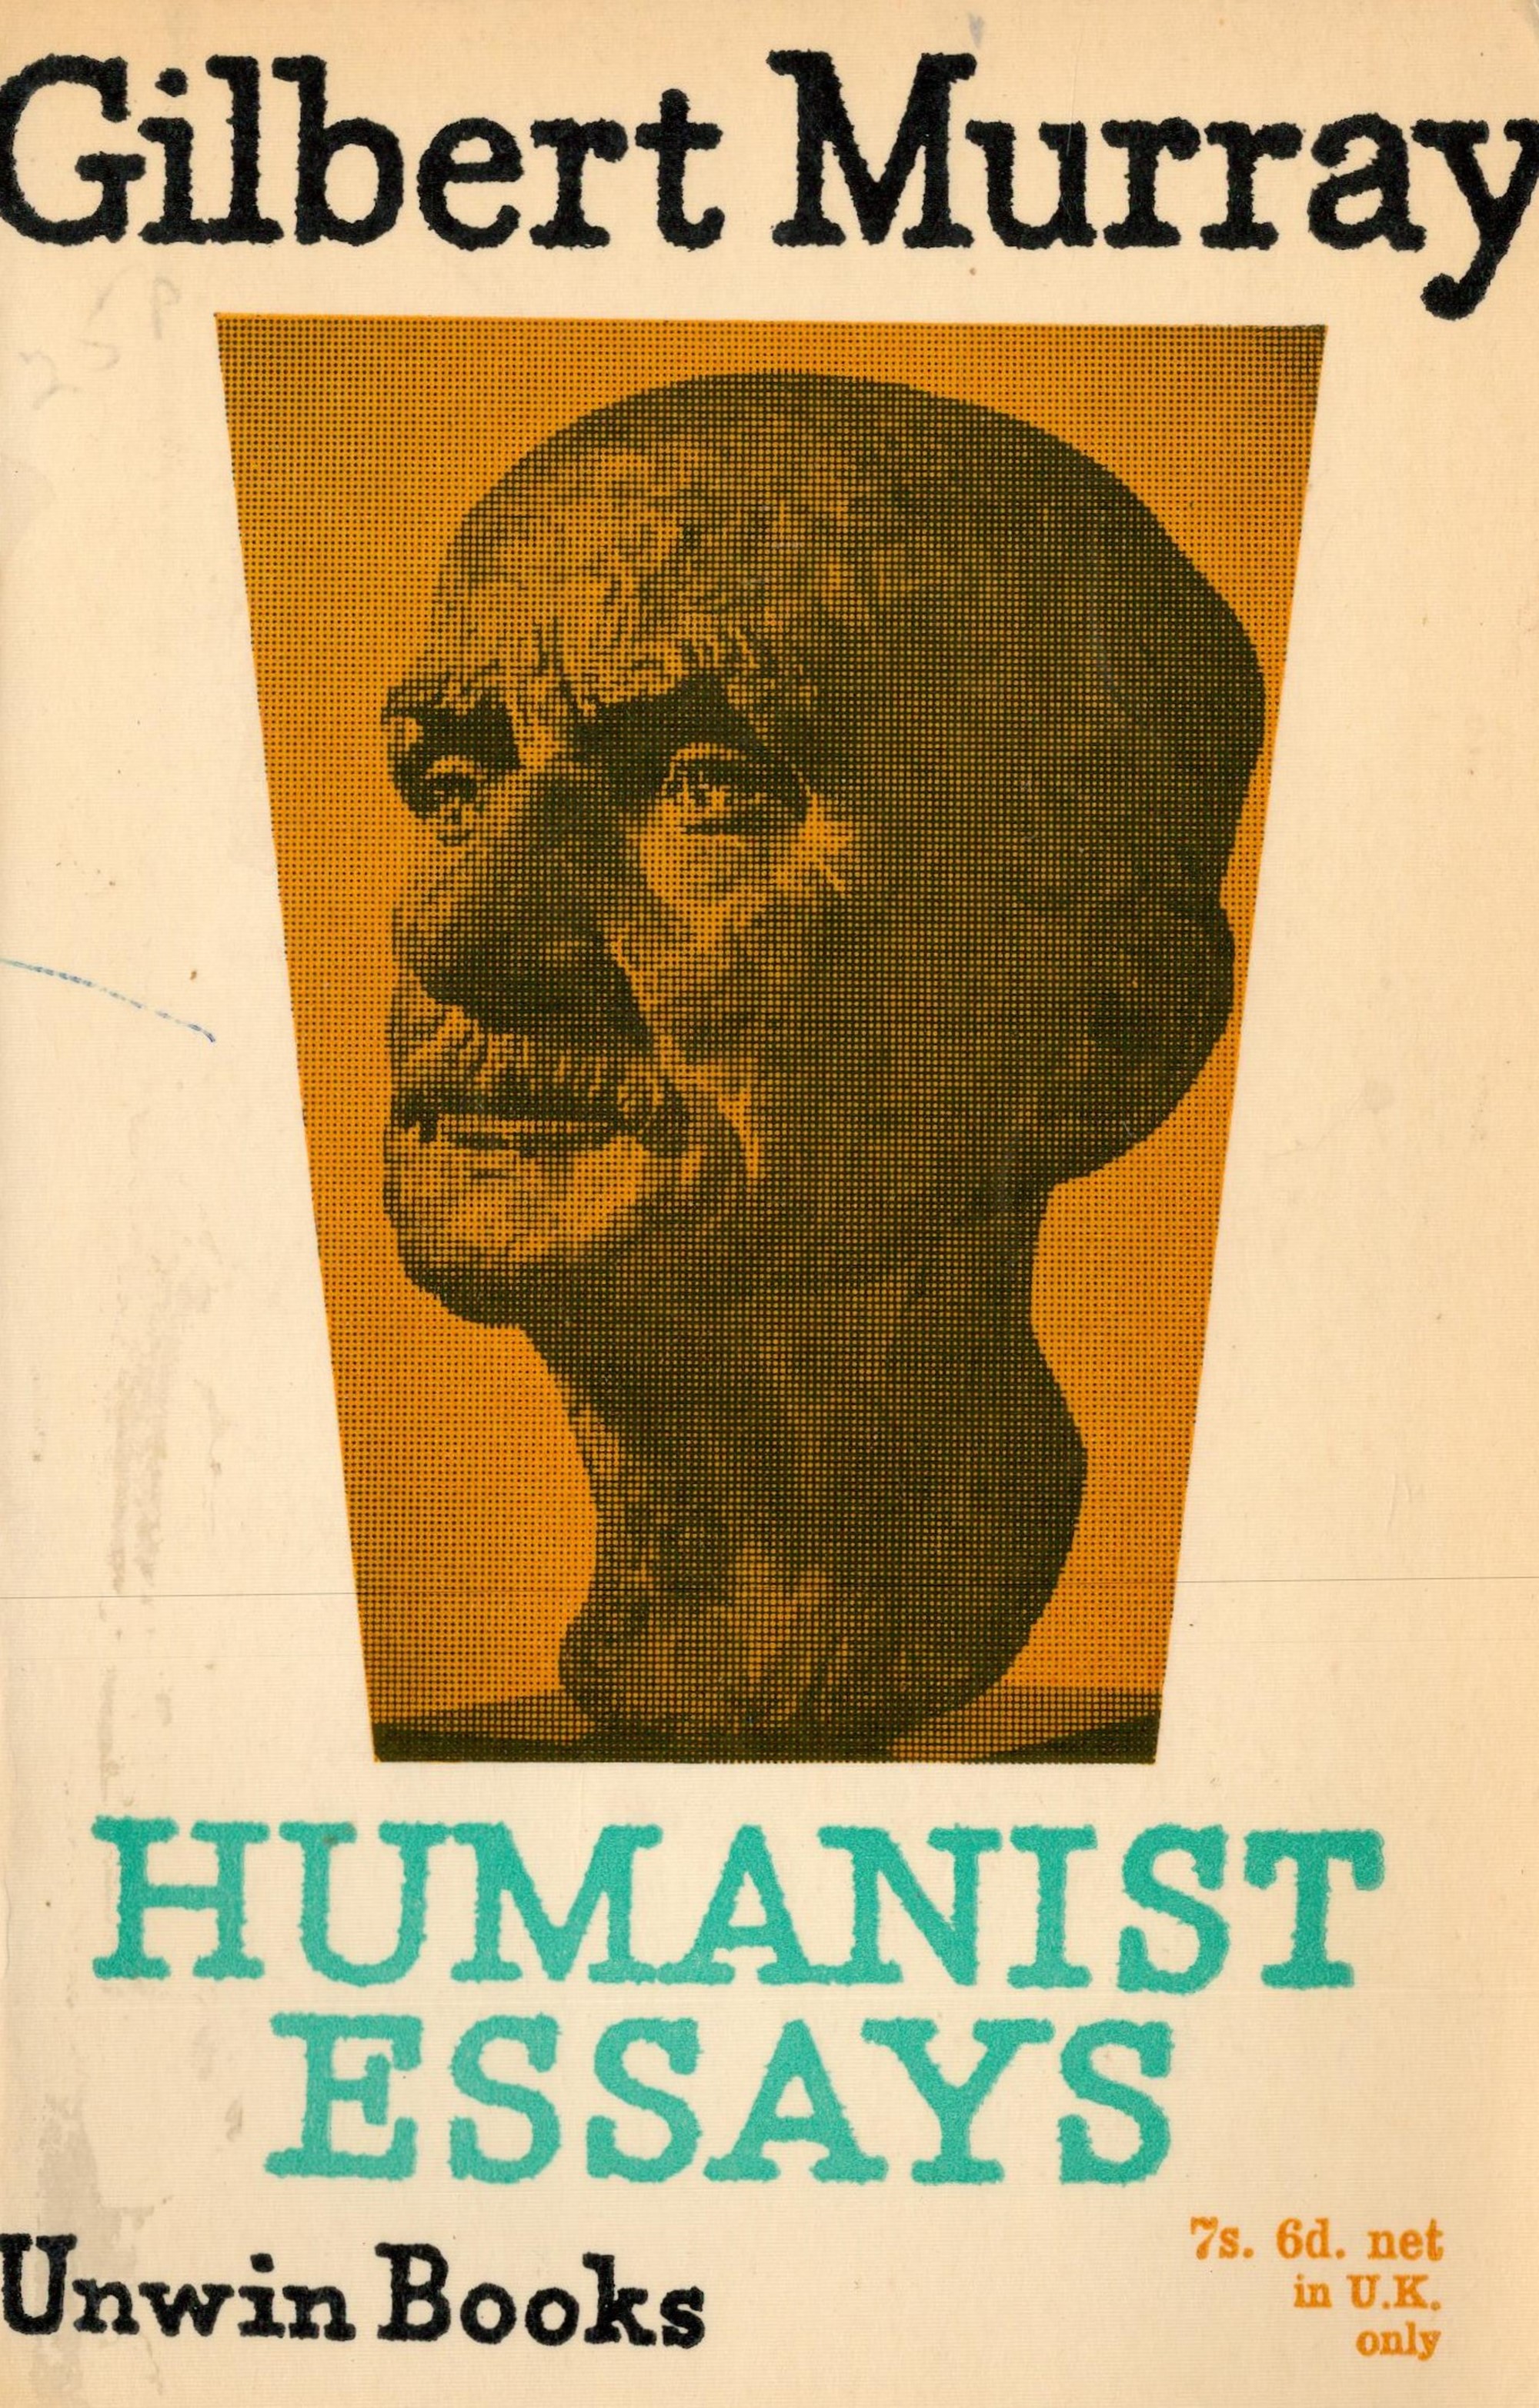 Humanist Essays by Gilbert Murray Softback Book 1964 First Edition published by Unwin Books ( - Image 2 of 6